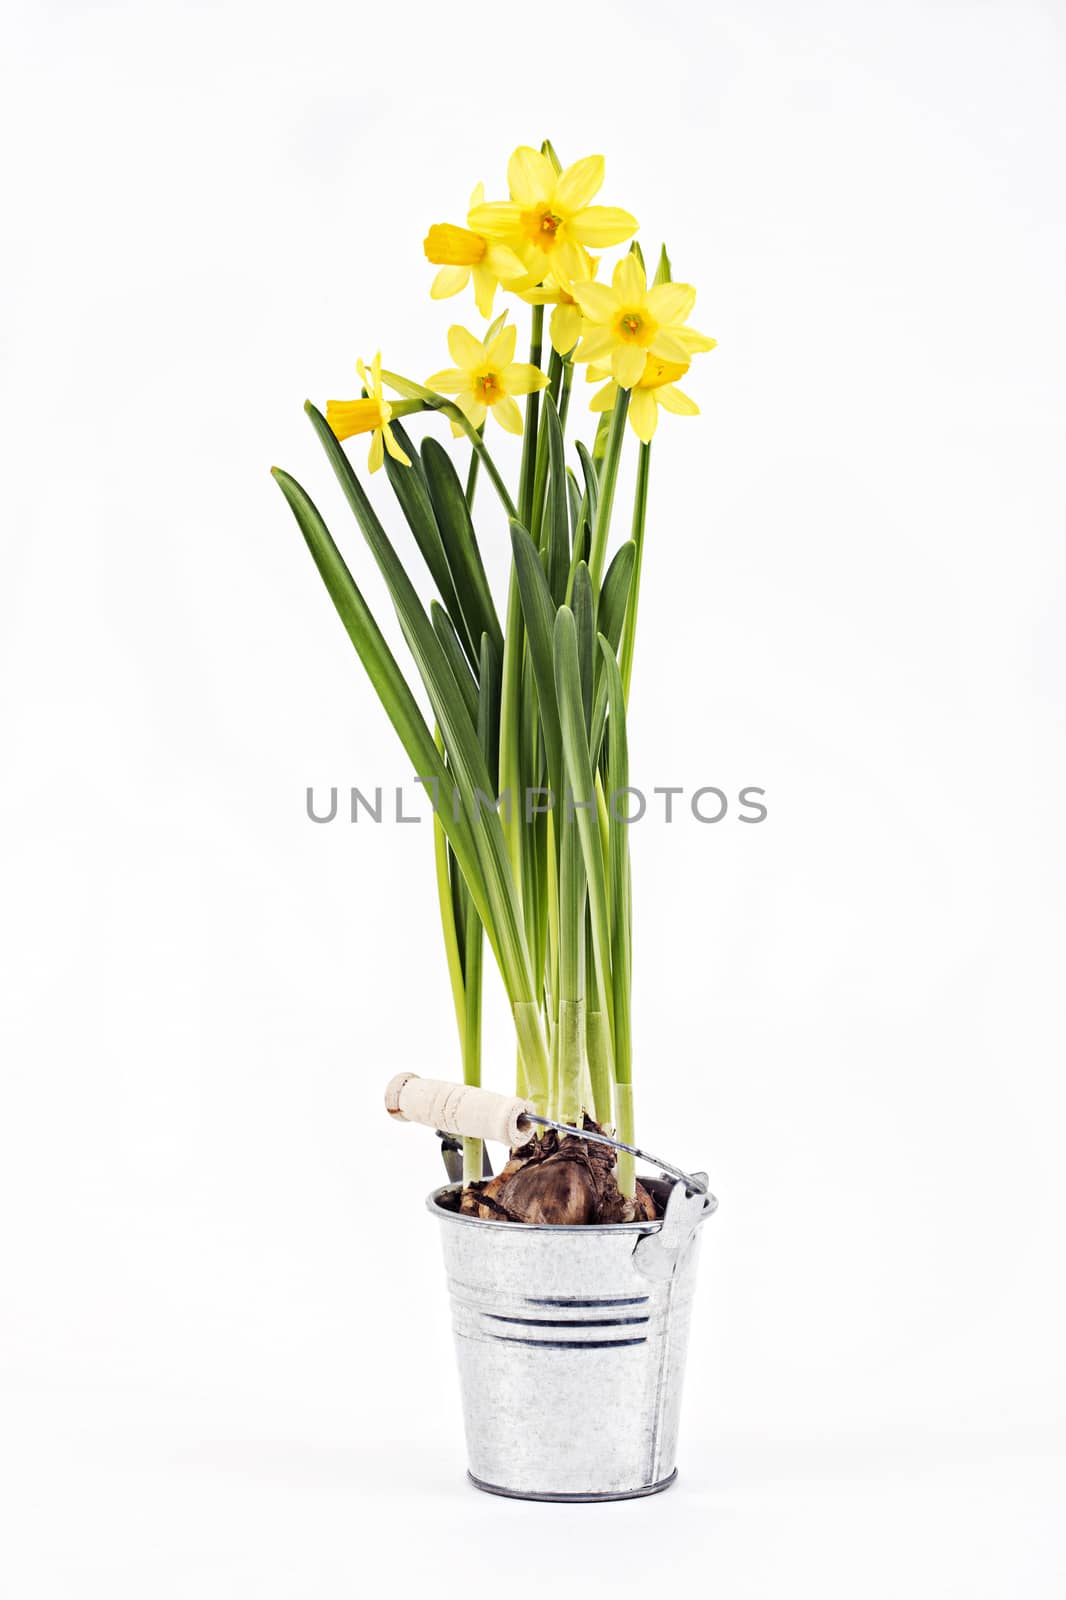 Yellow daffodils in a pot on a white background